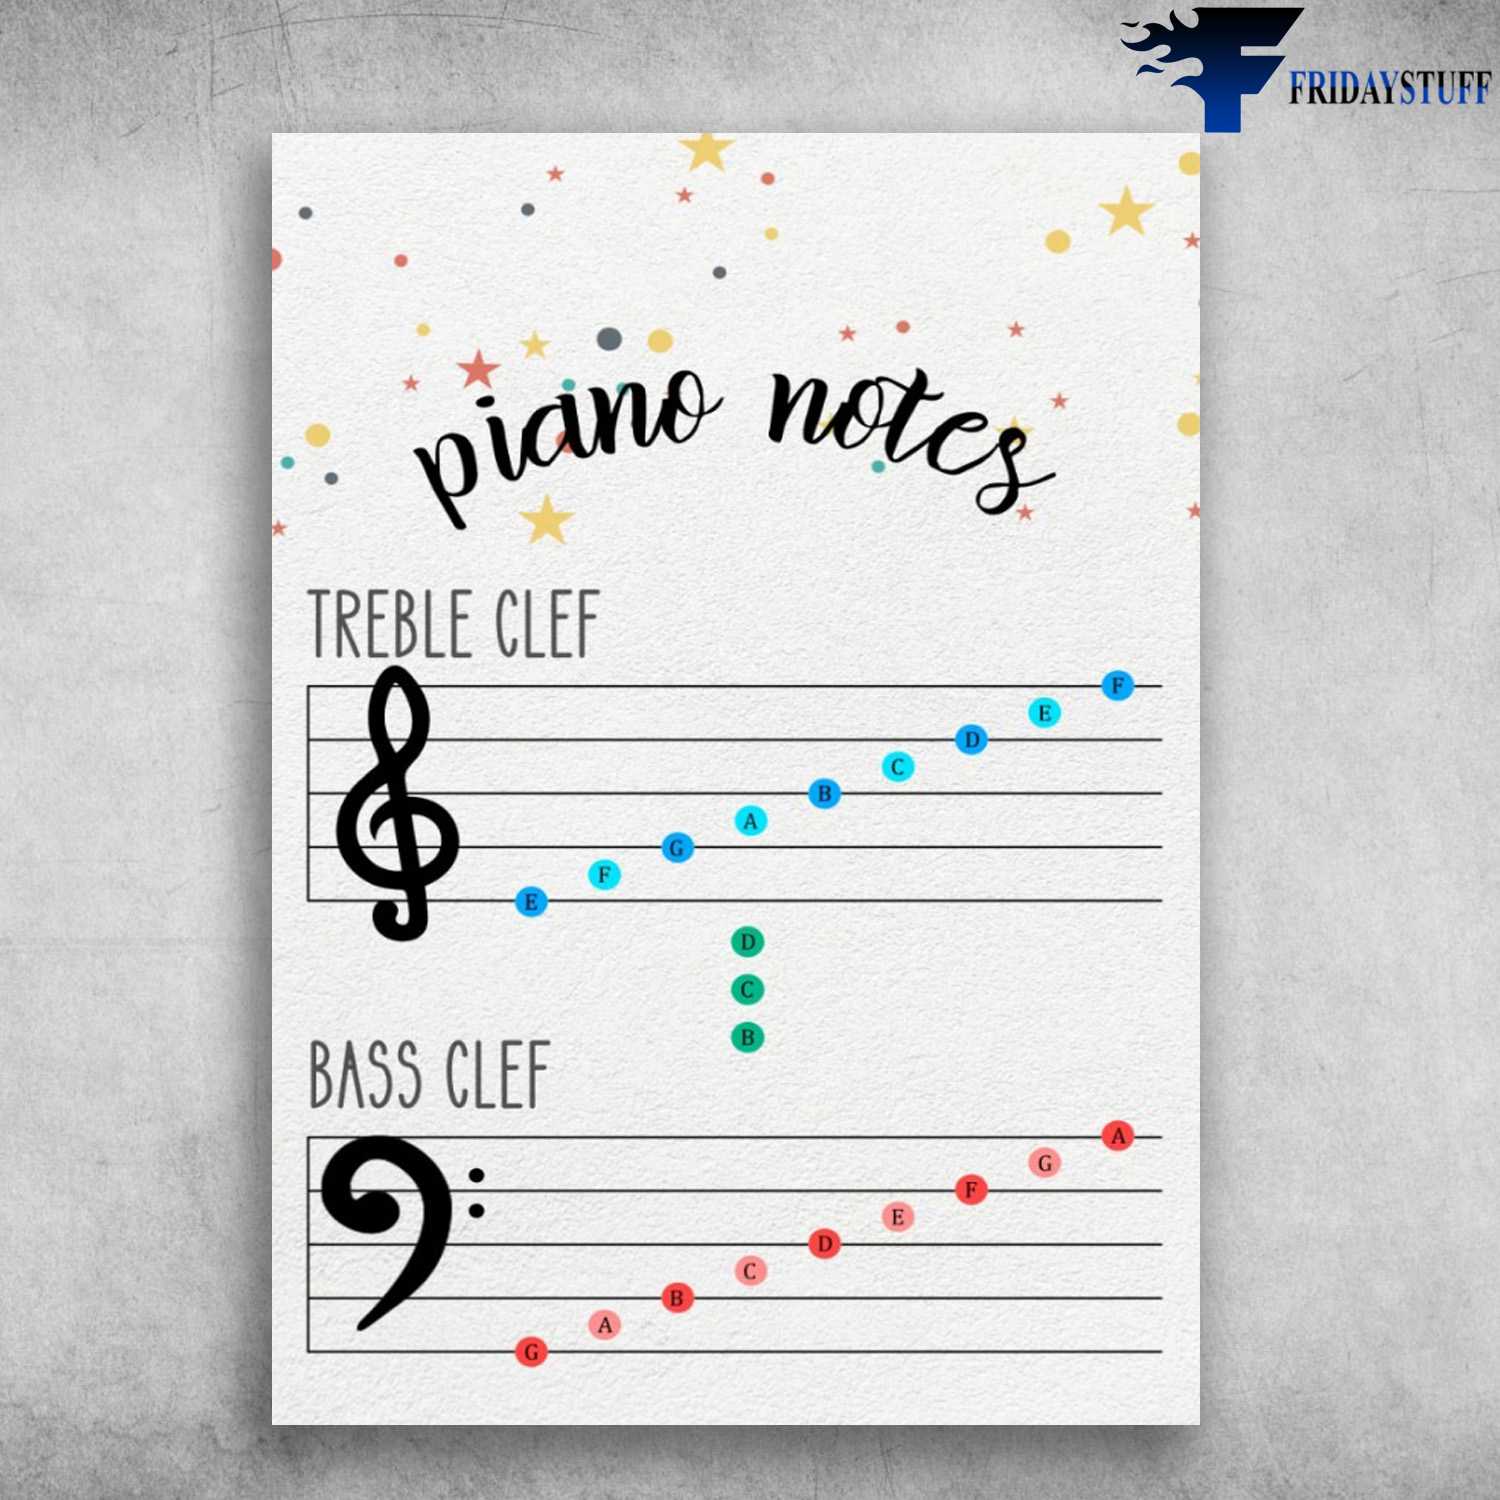 Piano Notes - Treble Clef, Bass Clef, Music Sheet